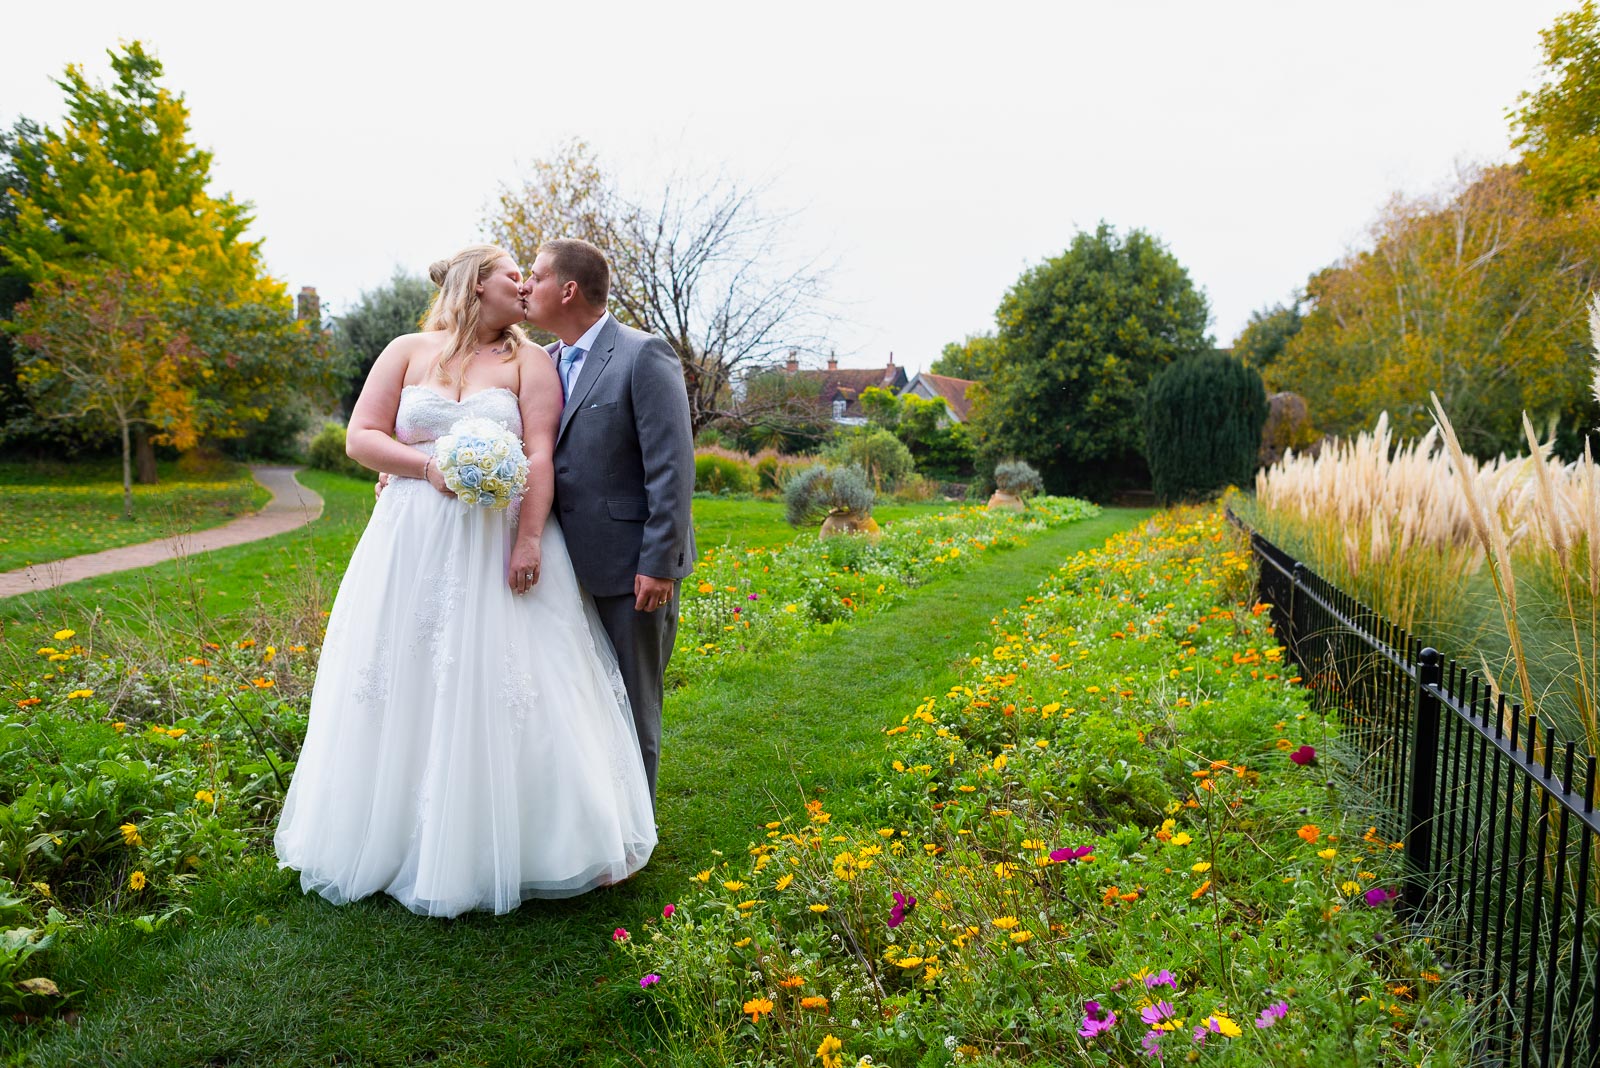 Eliana and Jacob embrace in Southover Grange after their wedding at Lewes Register Office.